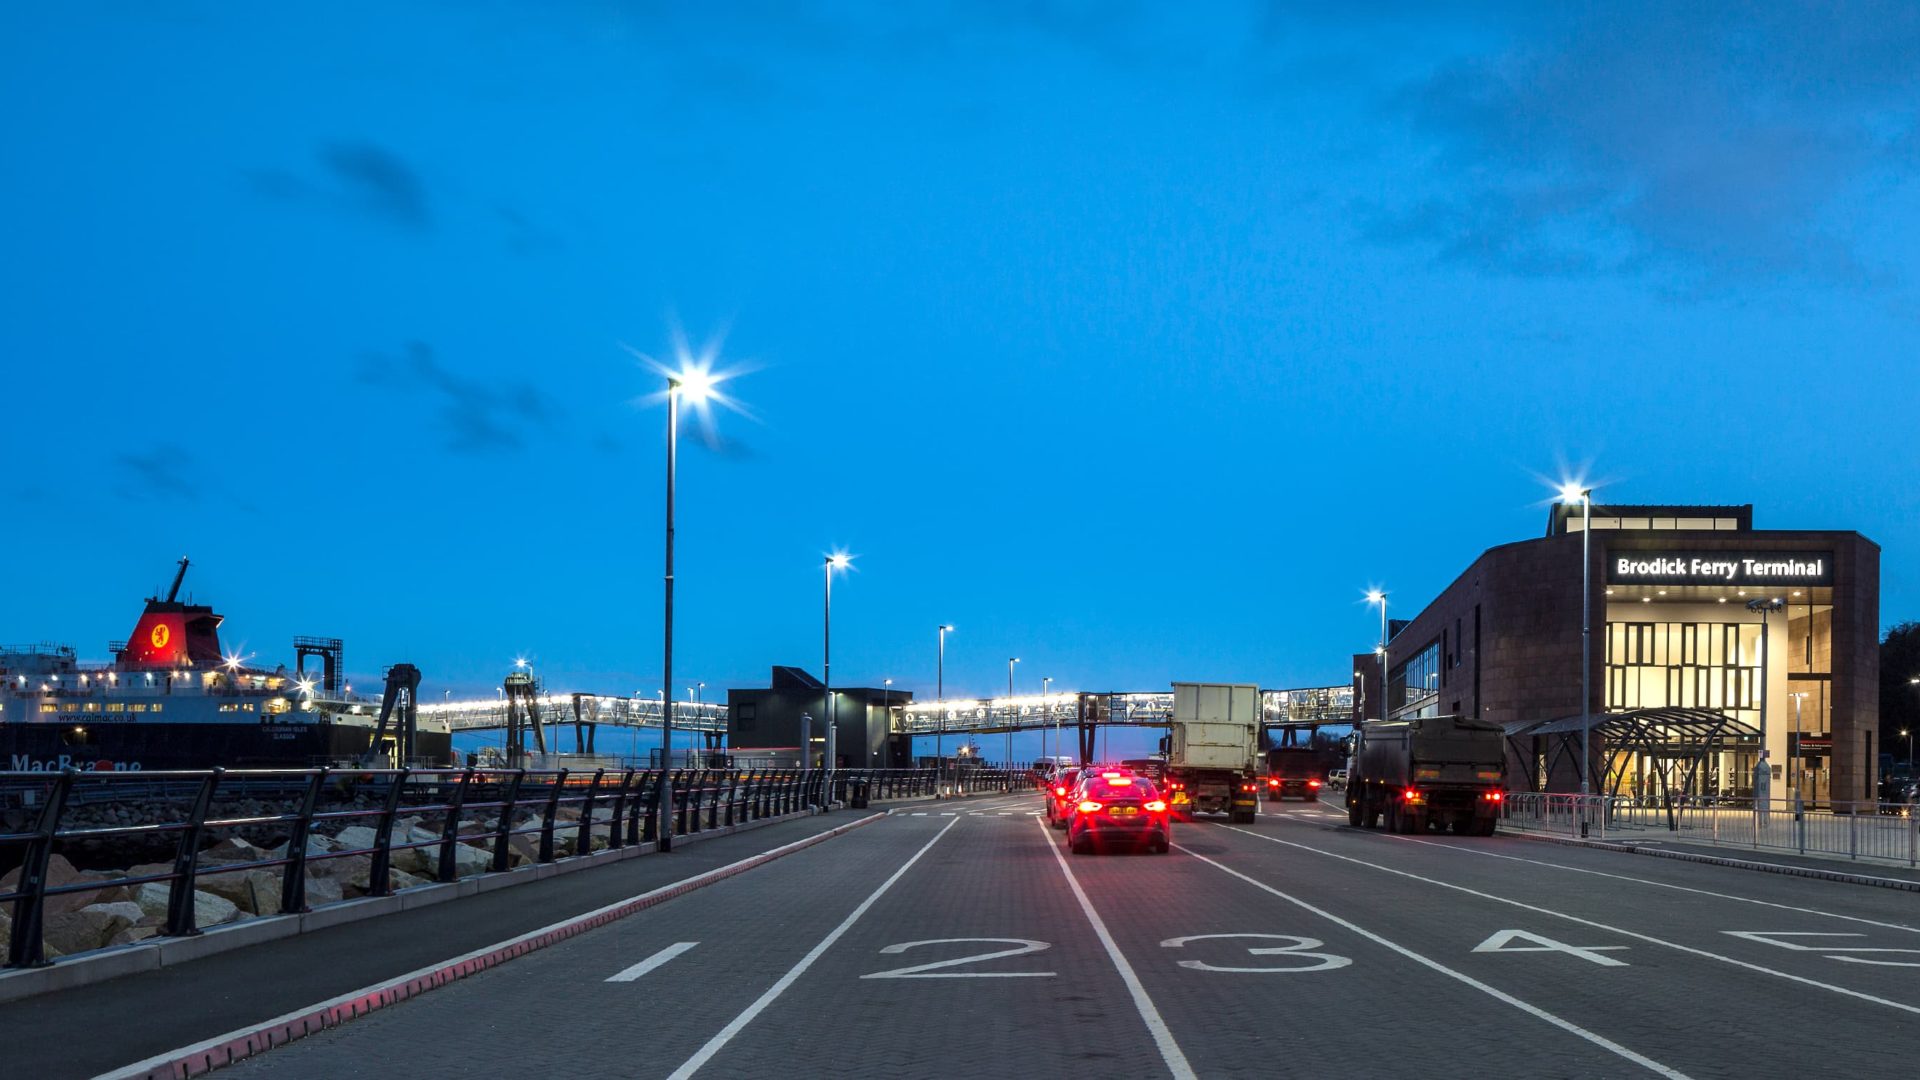 street view of brodick ferry terminal exterior building with cars and trucks